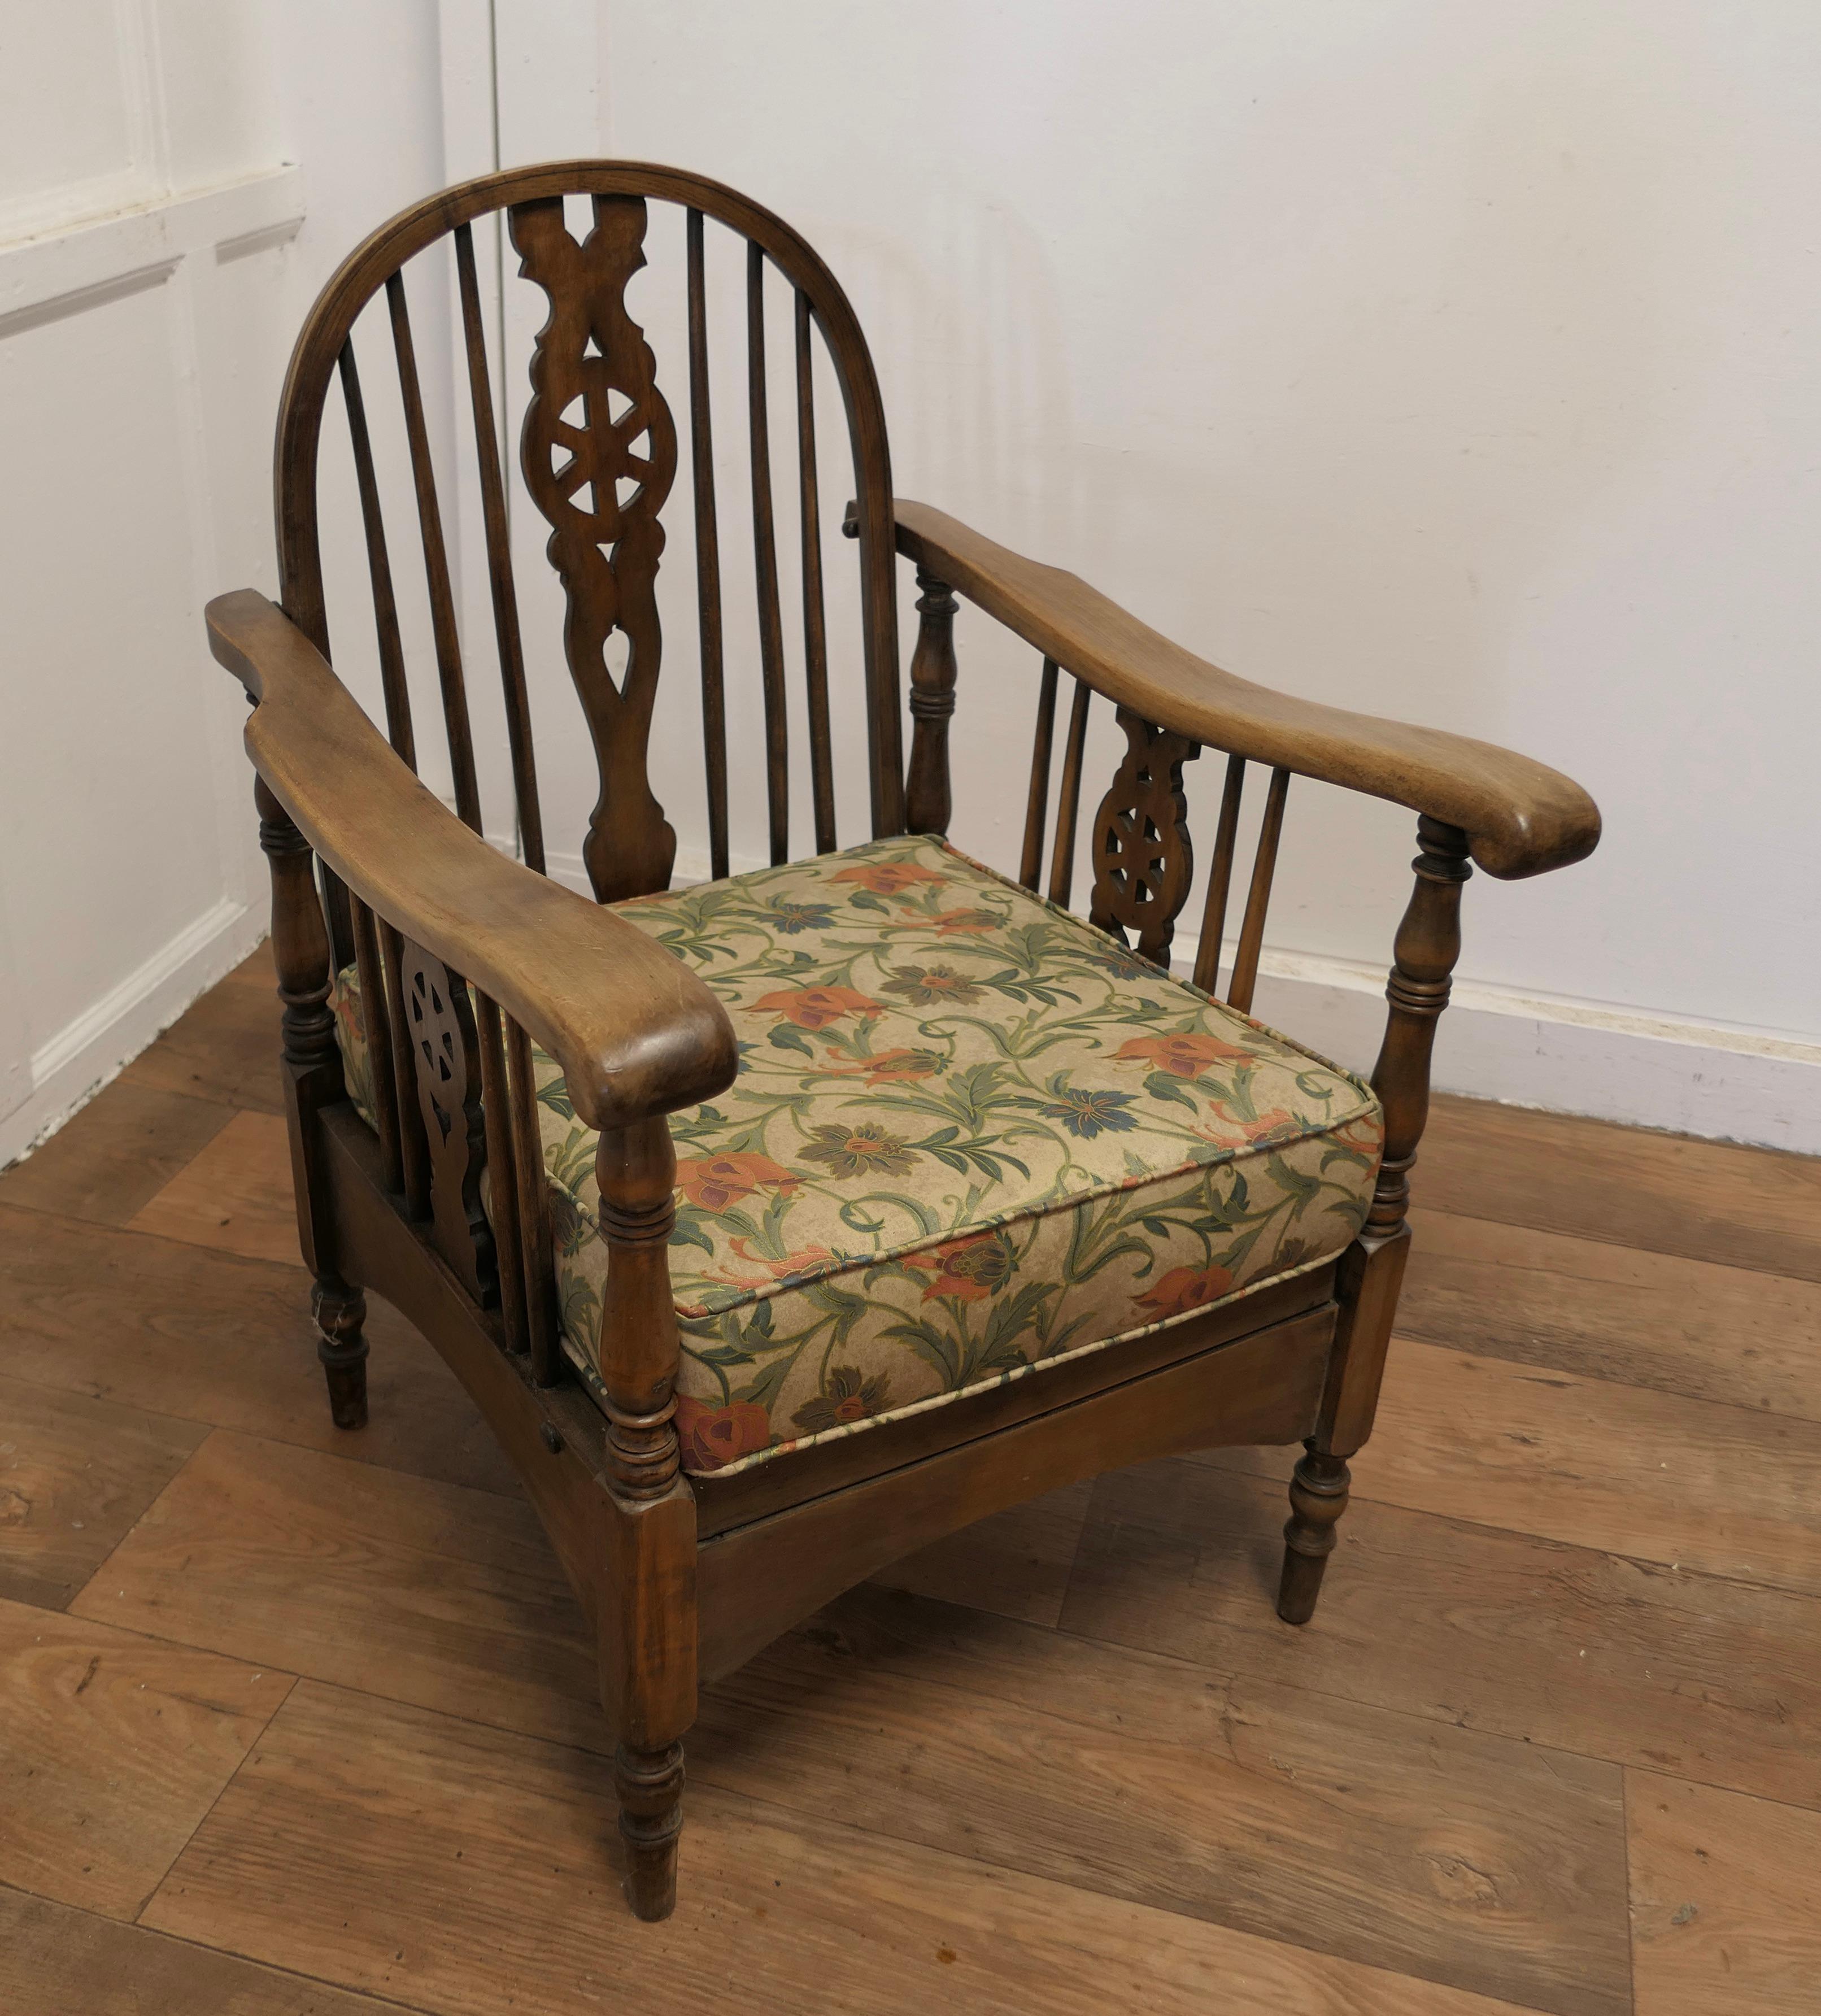 Beech and Ash Wheel Back Reclining Chair

This is a good traditional Beech and Ash arm chair it has a hooped back in the traditional Windsor style, the back of the chair tilts to set the chair into a reclining position

This is a good sturdy chair